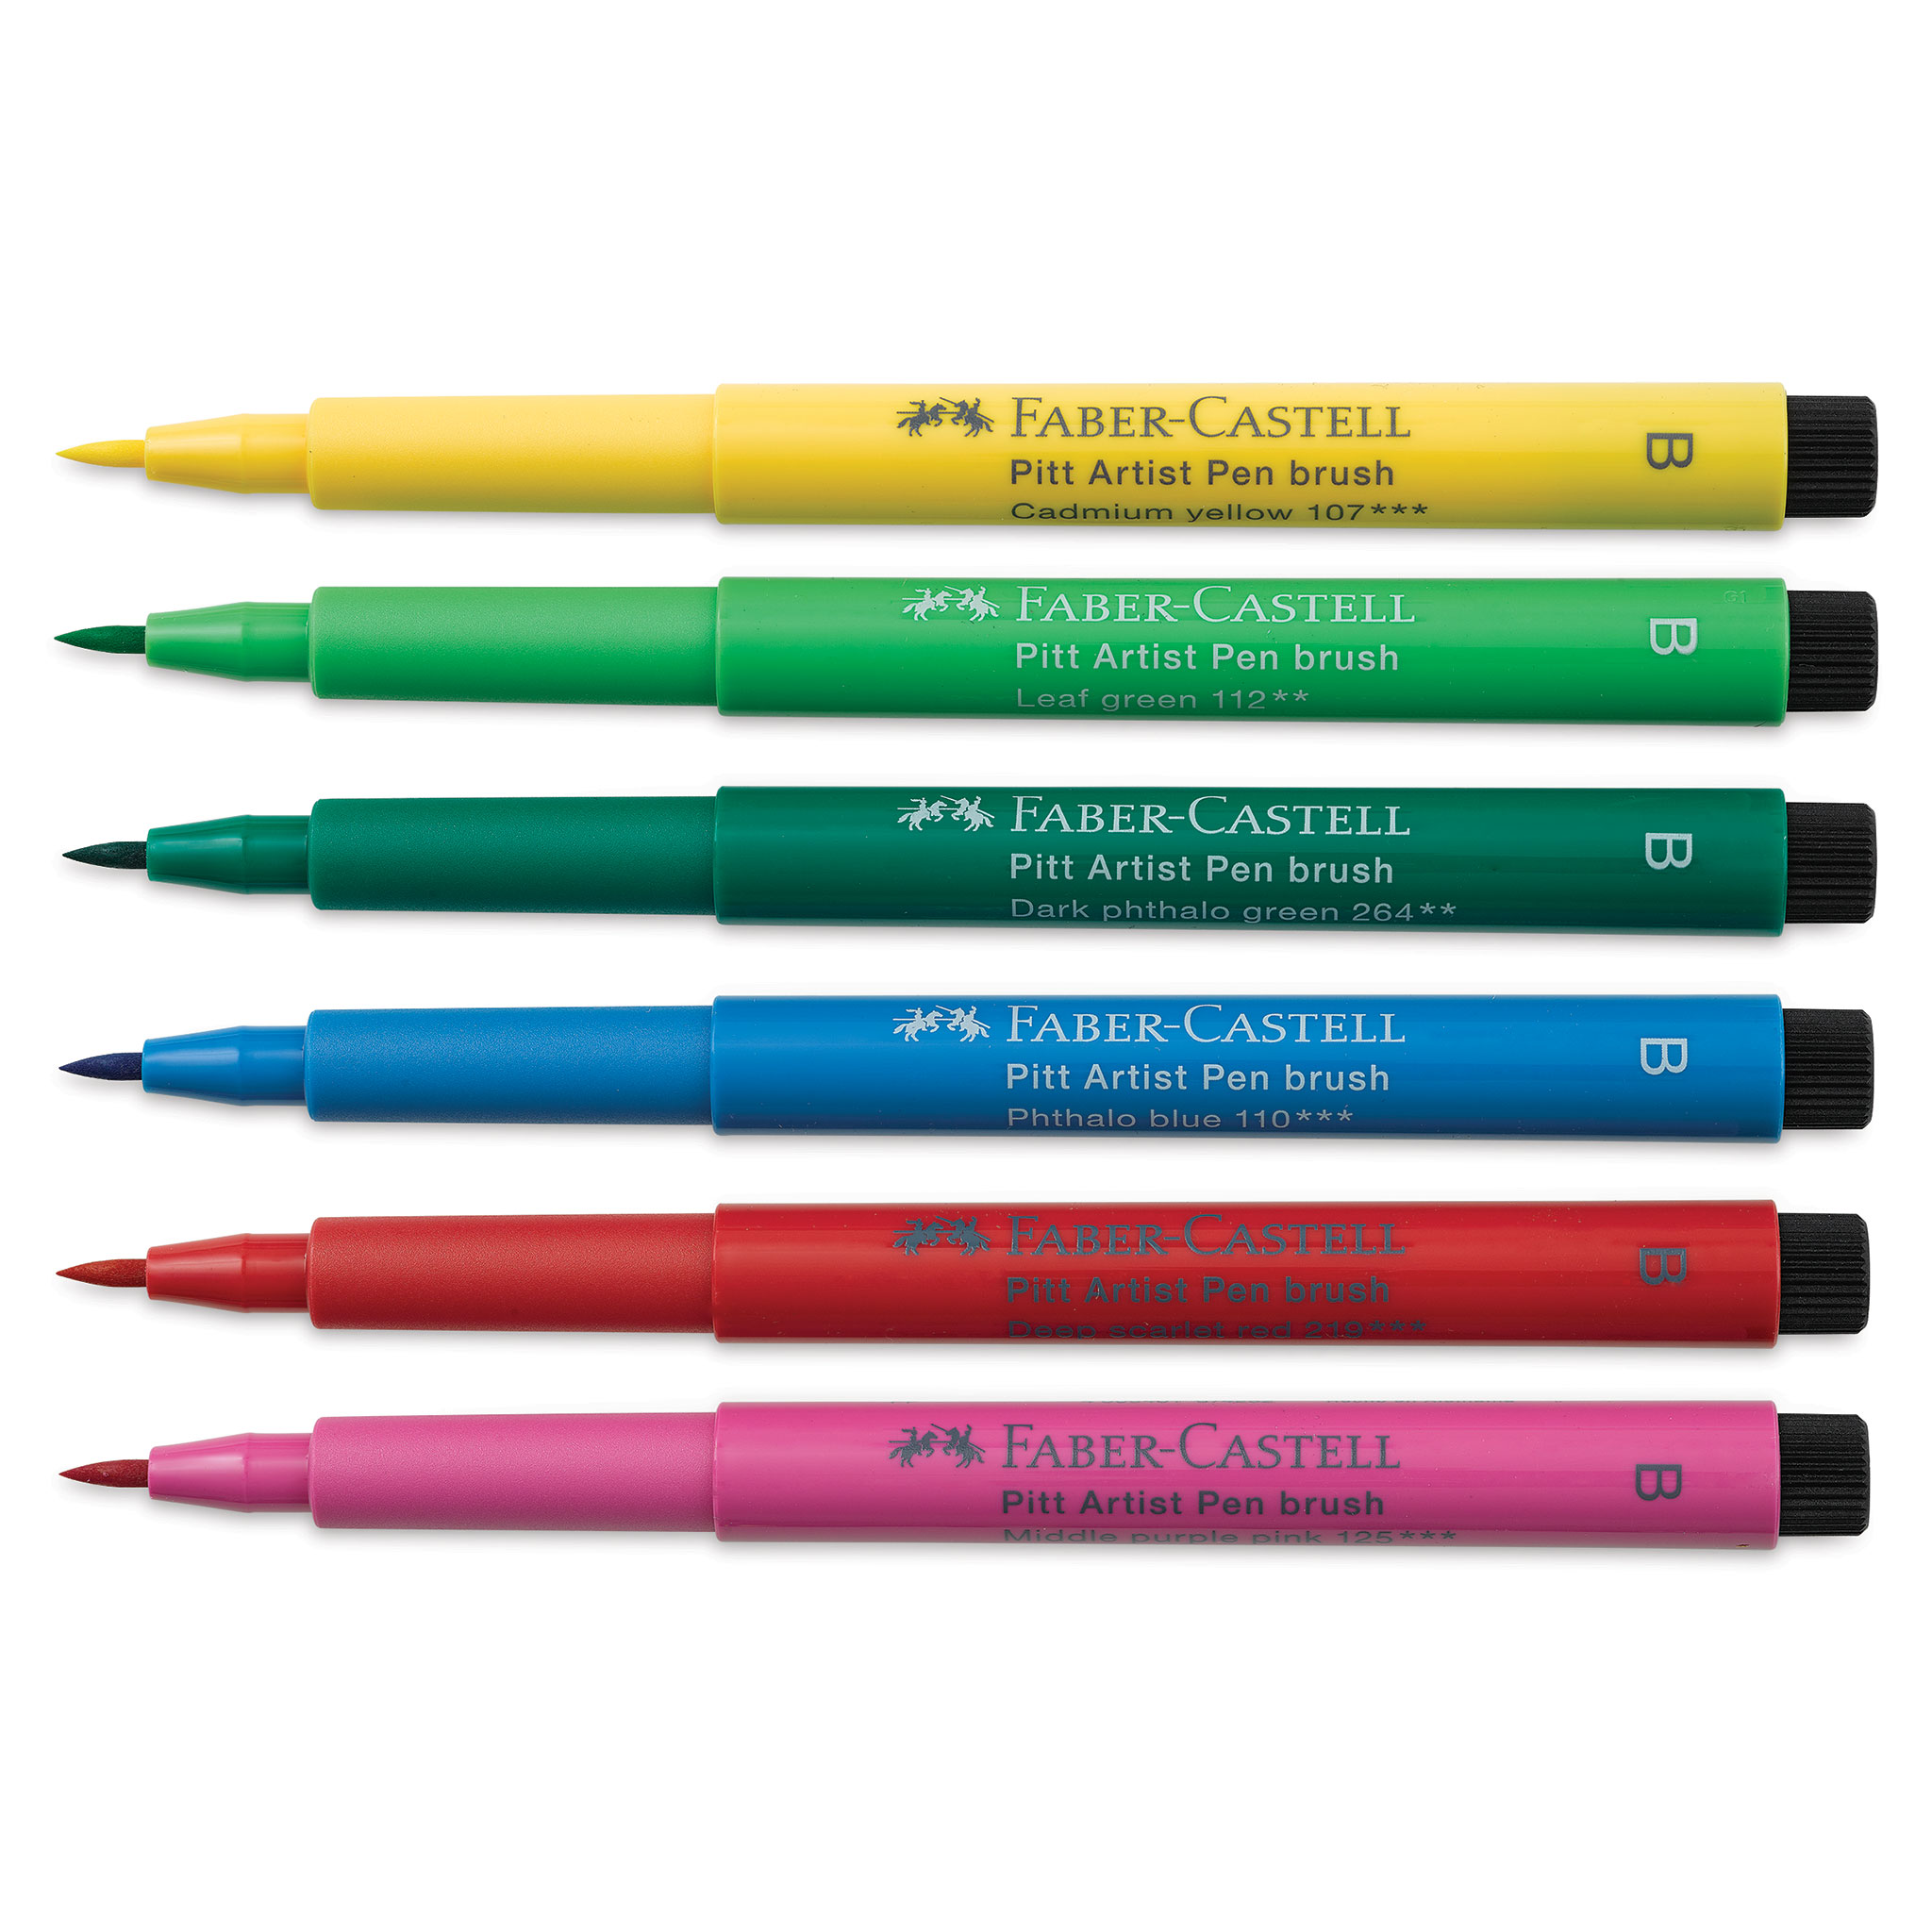 Faber-Castell Calligraphy Pens: Assorted Colors, 2.5mm